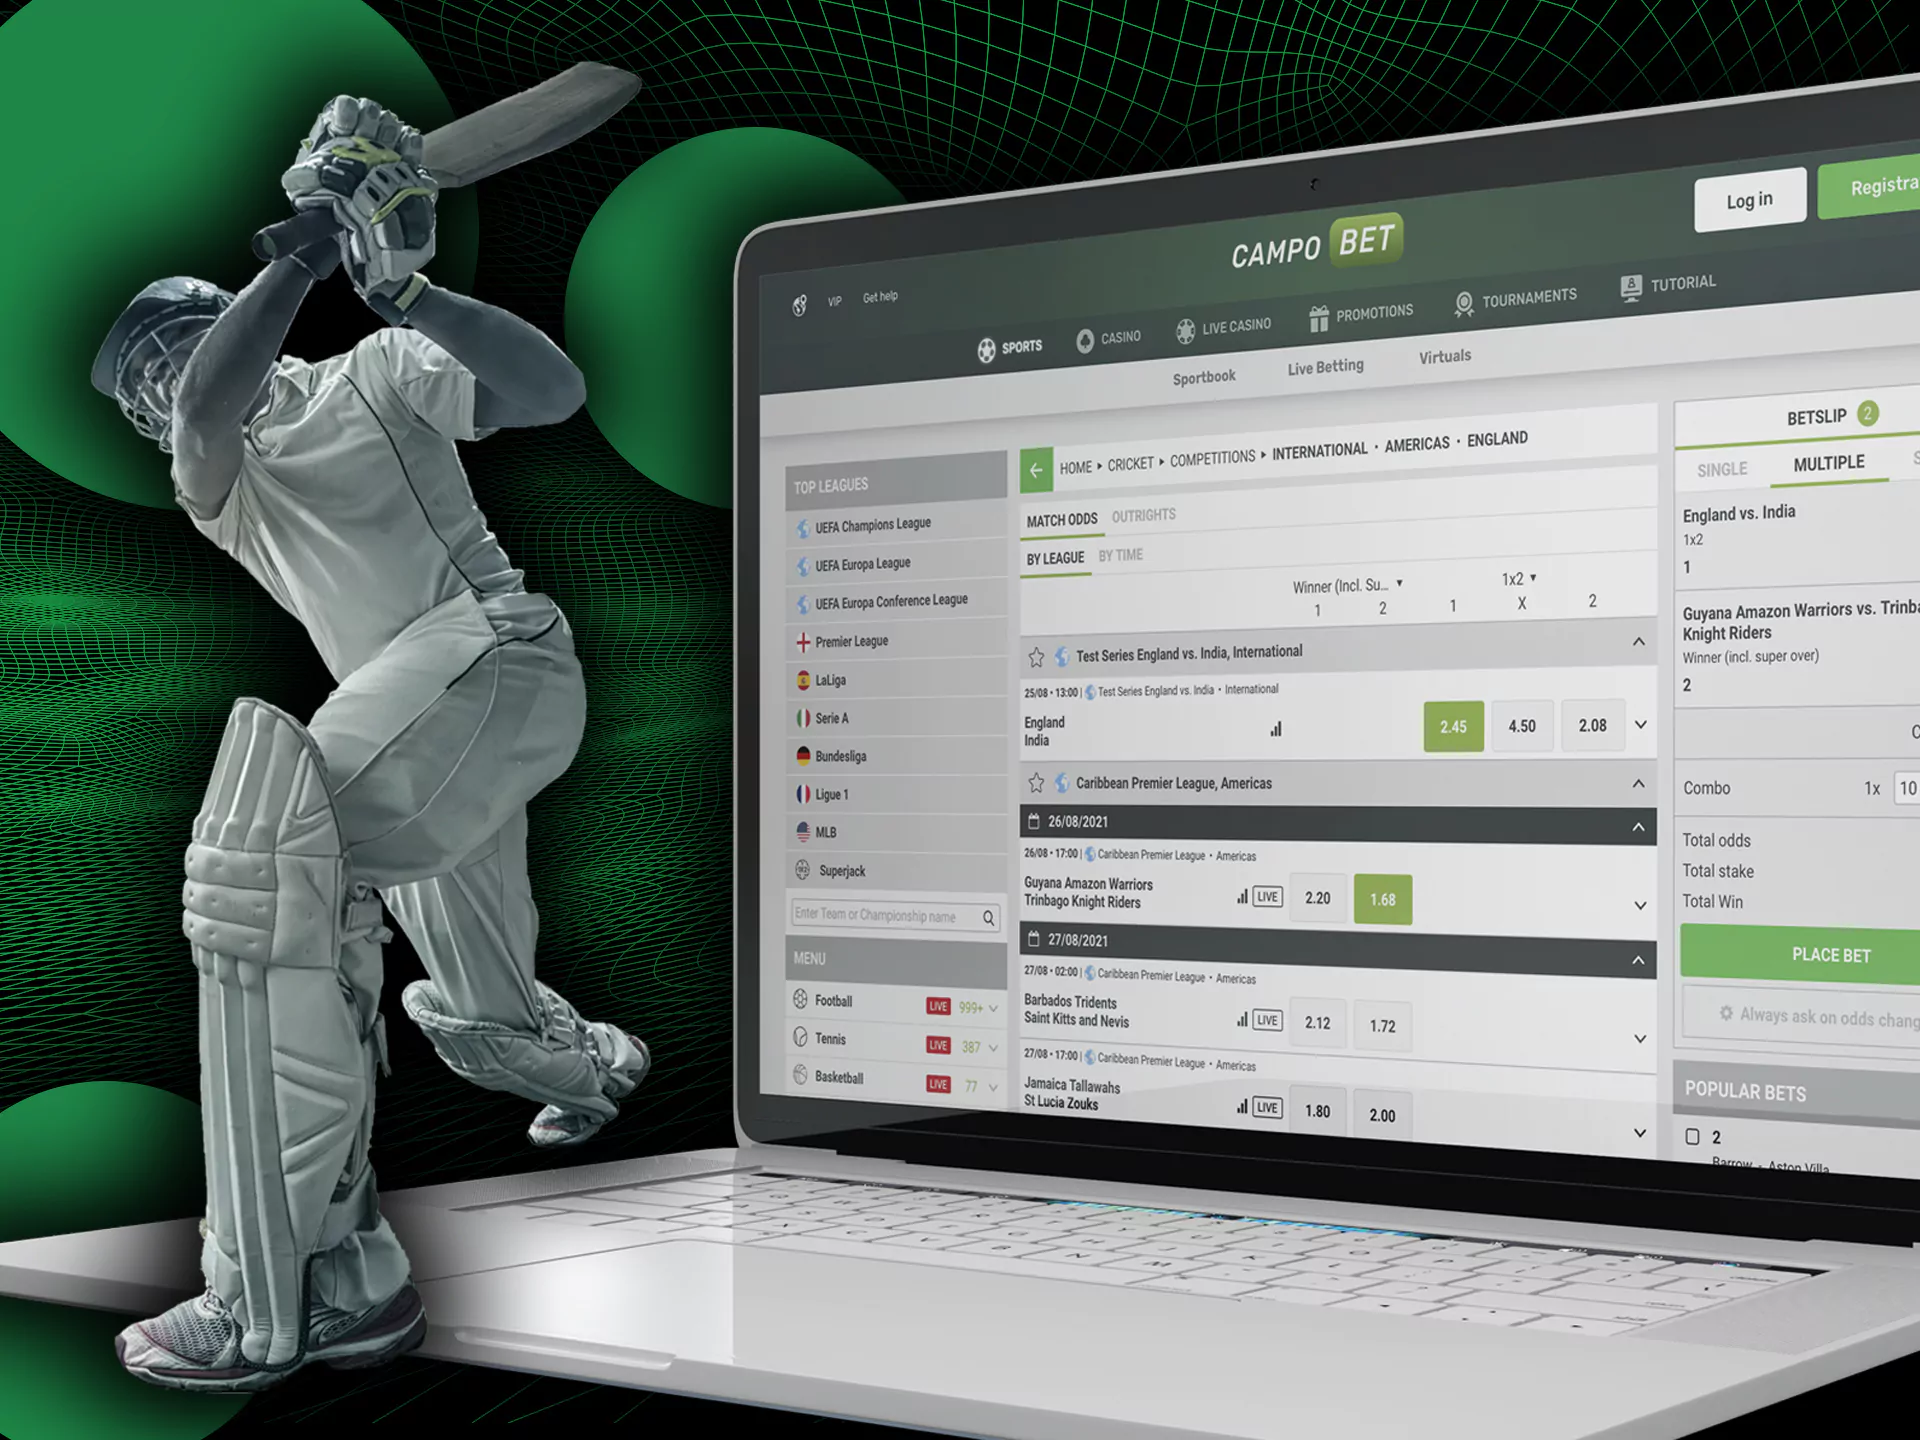 Cricket is the most popular sports section among Indian users on the site.